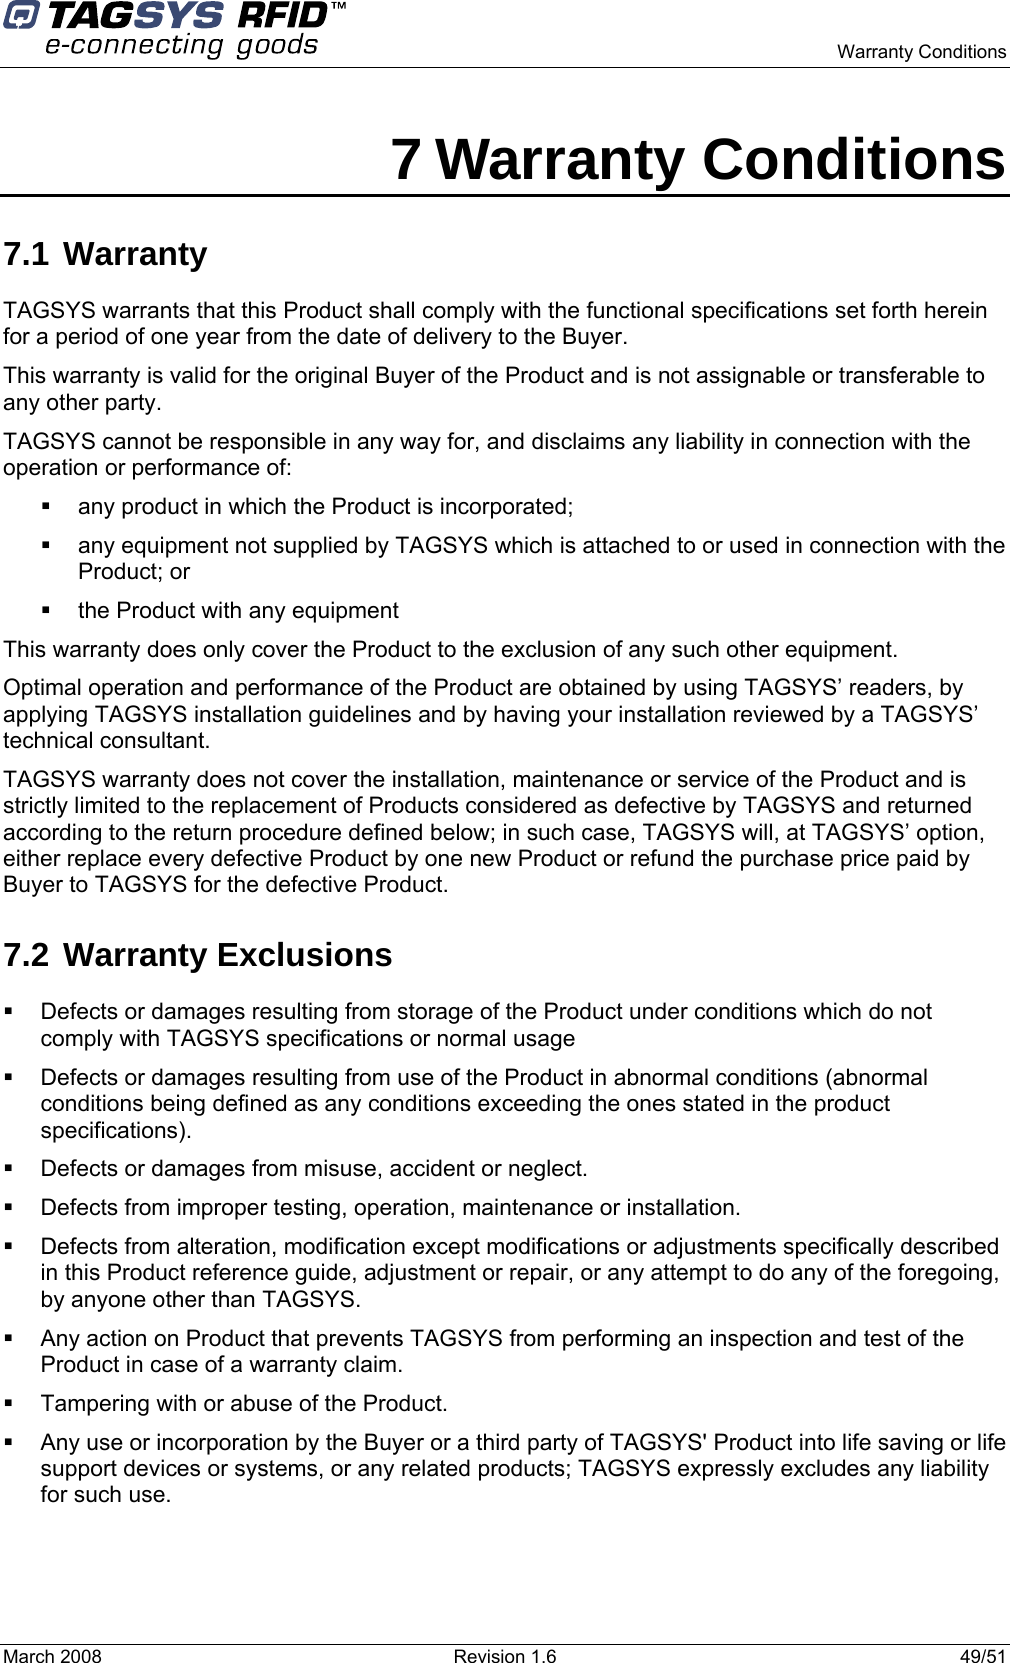      Warranty Conditions March 2008  Revision 1.6  49/51  7 Warranty Conditions 7.1 Warranty TAGSYS warrants that this Product shall comply with the functional specifications set forth herein for a period of one year from the date of delivery to the Buyer. This warranty is valid for the original Buyer of the Product and is not assignable or transferable to any other party. TAGSYS cannot be responsible in any way for, and disclaims any liability in connection with the operation or performance of:   any product in which the Product is incorporated;   any equipment not supplied by TAGSYS which is attached to or used in connection with the Product; or   the Product with any equipment This warranty does only cover the Product to the exclusion of any such other equipment. Optimal operation and performance of the Product are obtained by using TAGSYS’ readers, by applying TAGSYS installation guidelines and by having your installation reviewed by a TAGSYS’ technical consultant. TAGSYS warranty does not cover the installation, maintenance or service of the Product and is strictly limited to the replacement of Products considered as defective by TAGSYS and returned according to the return procedure defined below; in such case, TAGSYS will, at TAGSYS’ option, either replace every defective Product by one new Product or refund the purchase price paid by Buyer to TAGSYS for the defective Product. 7.2 Warranty Exclusions   Defects or damages resulting from storage of the Product under conditions which do not comply with TAGSYS specifications or normal usage   Defects or damages resulting from use of the Product in abnormal conditions (abnormal conditions being defined as any conditions exceeding the ones stated in the product specifications).   Defects or damages from misuse, accident or neglect.   Defects from improper testing, operation, maintenance or installation.   Defects from alteration, modification except modifications or adjustments specifically described in this Product reference guide, adjustment or repair, or any attempt to do any of the foregoing, by anyone other than TAGSYS.   Any action on Product that prevents TAGSYS from performing an inspection and test of the Product in case of a warranty claim.   Tampering with or abuse of the Product.   Any use or incorporation by the Buyer or a third party of TAGSYS&apos; Product into life saving or life support devices or systems, or any related products; TAGSYS expressly excludes any liability for such use. 